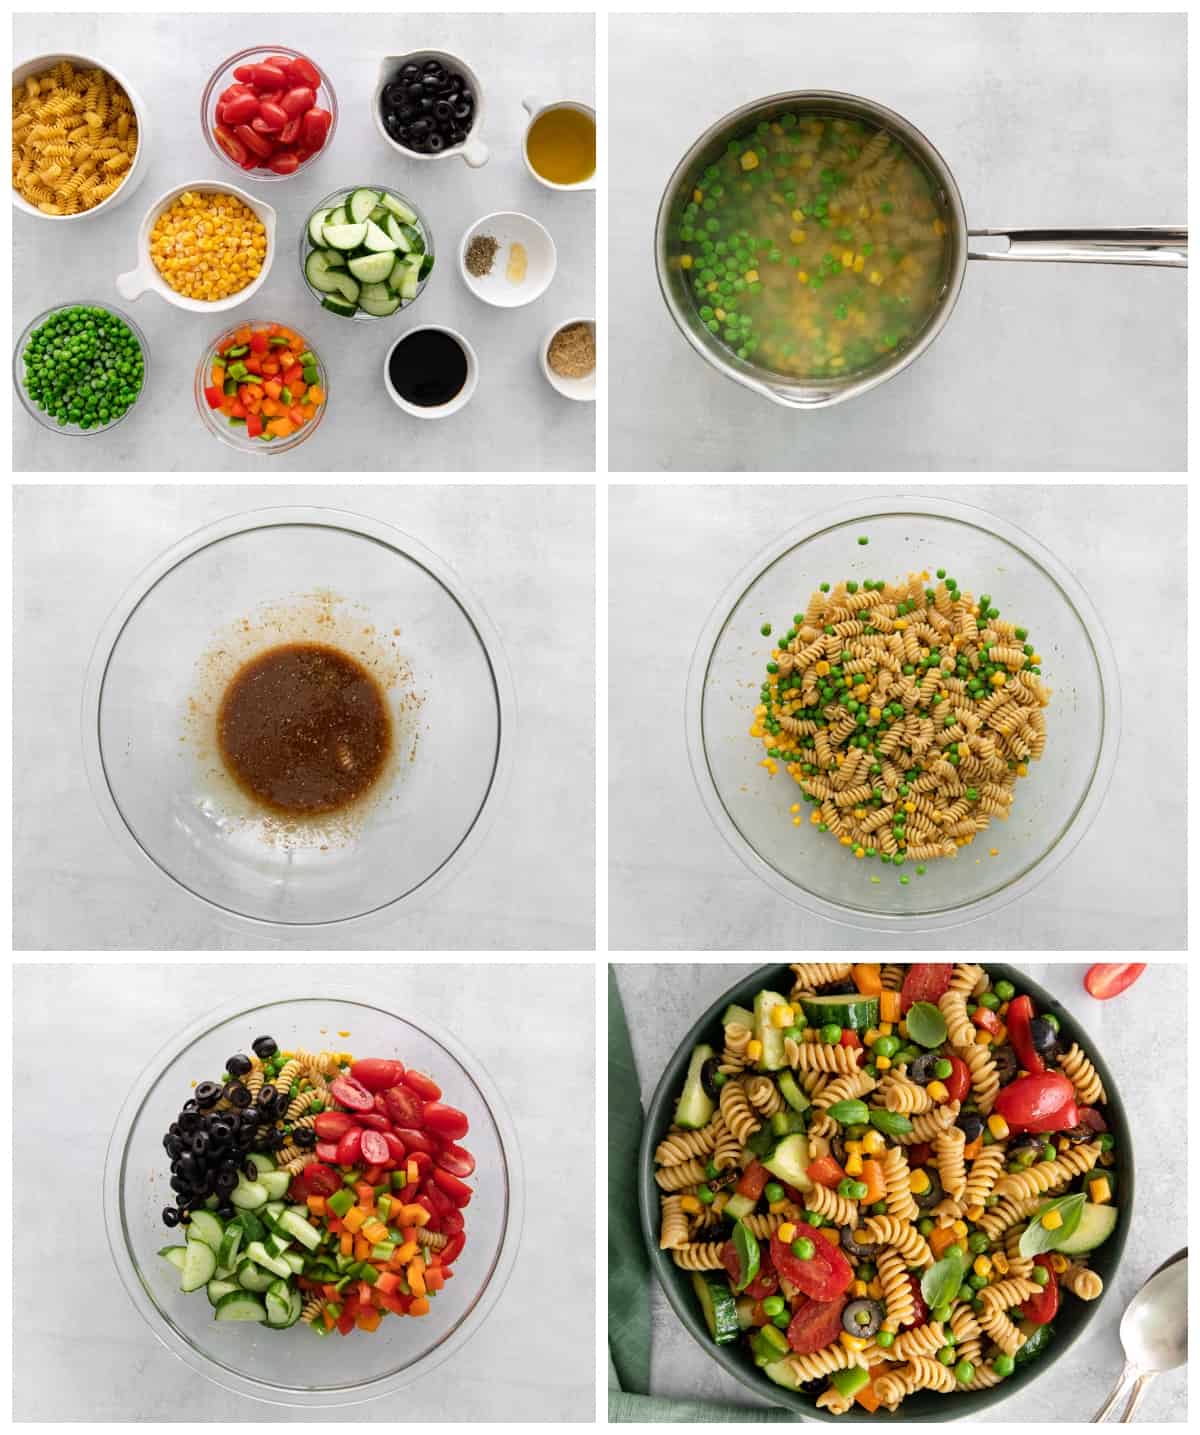 how to make veggie pasta salad step by step photo instructions 